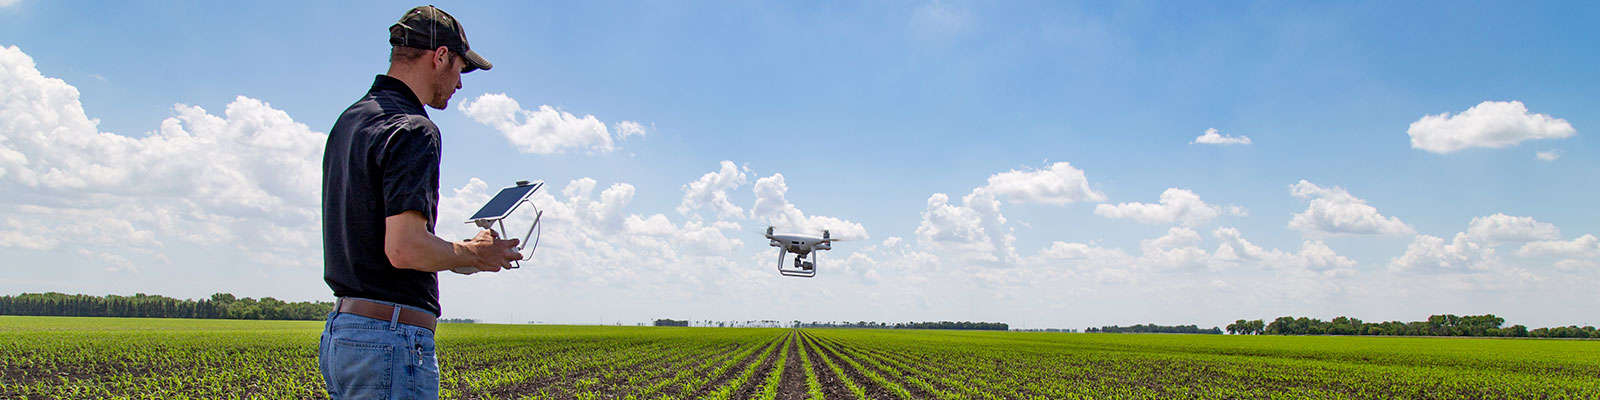 Farmer uses a small drone to check fields